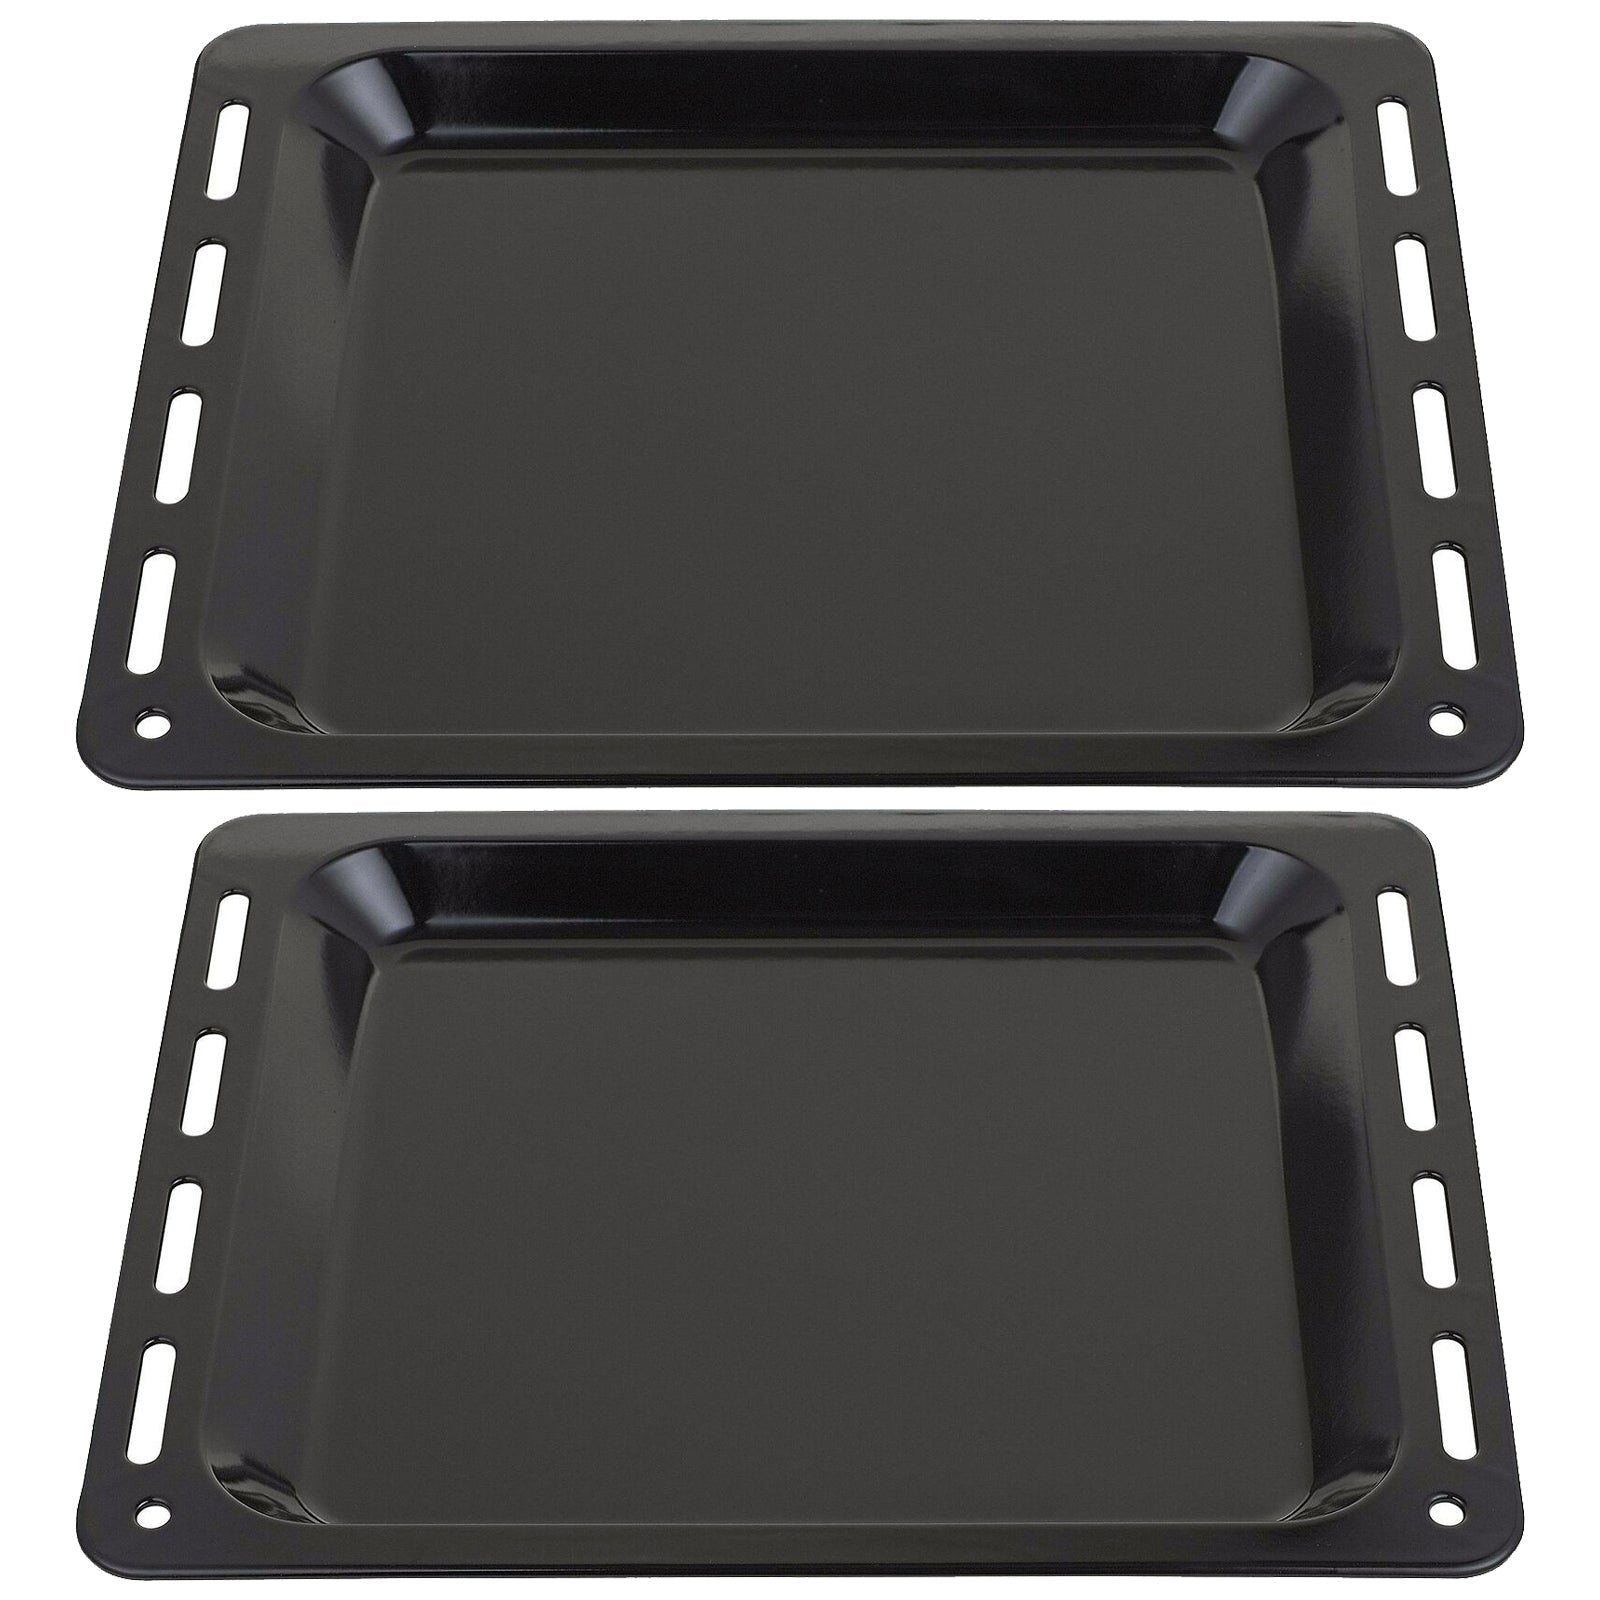 Baking Tray Enamelled Pan for Neff Oven Cooker (448mm x 360mm x 25mm, Pack of 2)